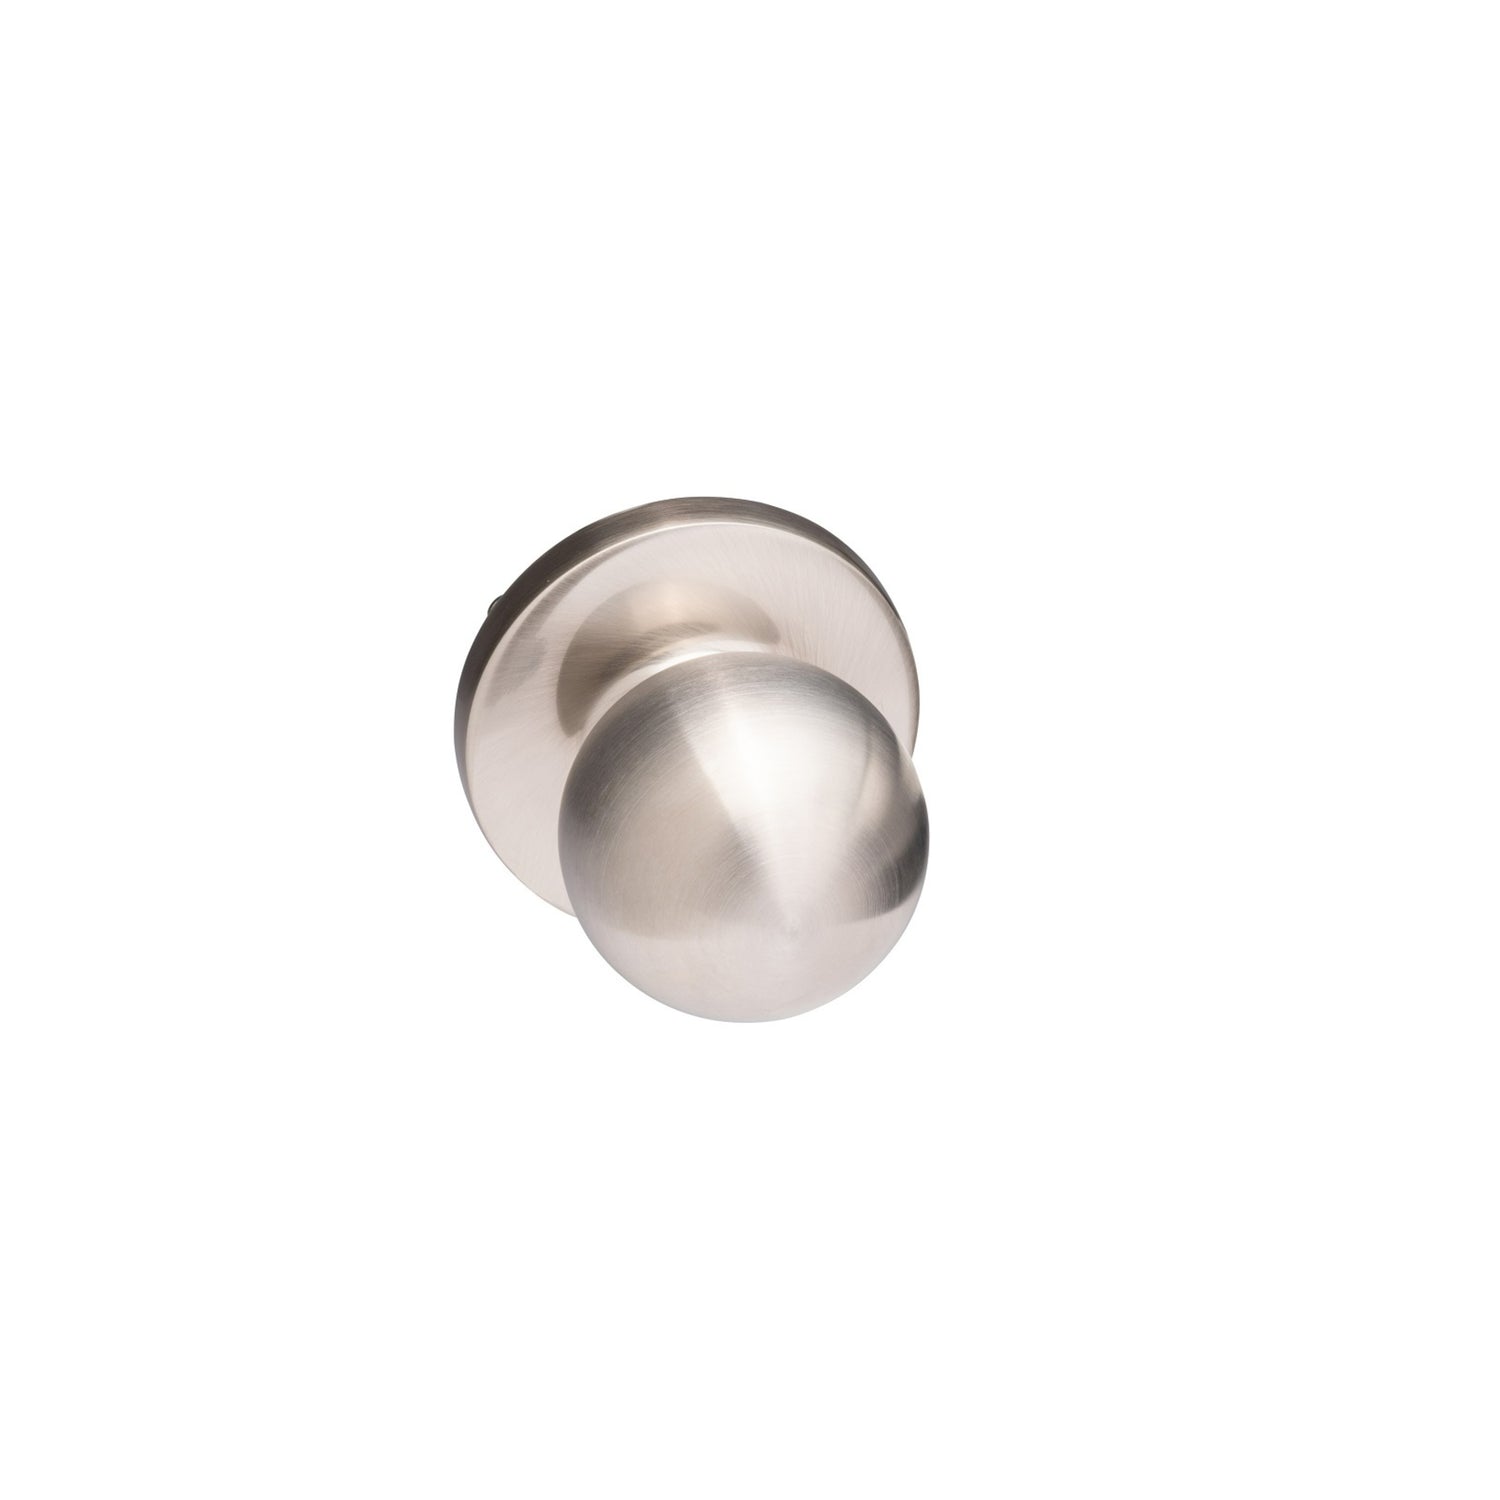 Commercial Passage Ball Knob Trim for Panic Exit Device -  Pro-Edge HD